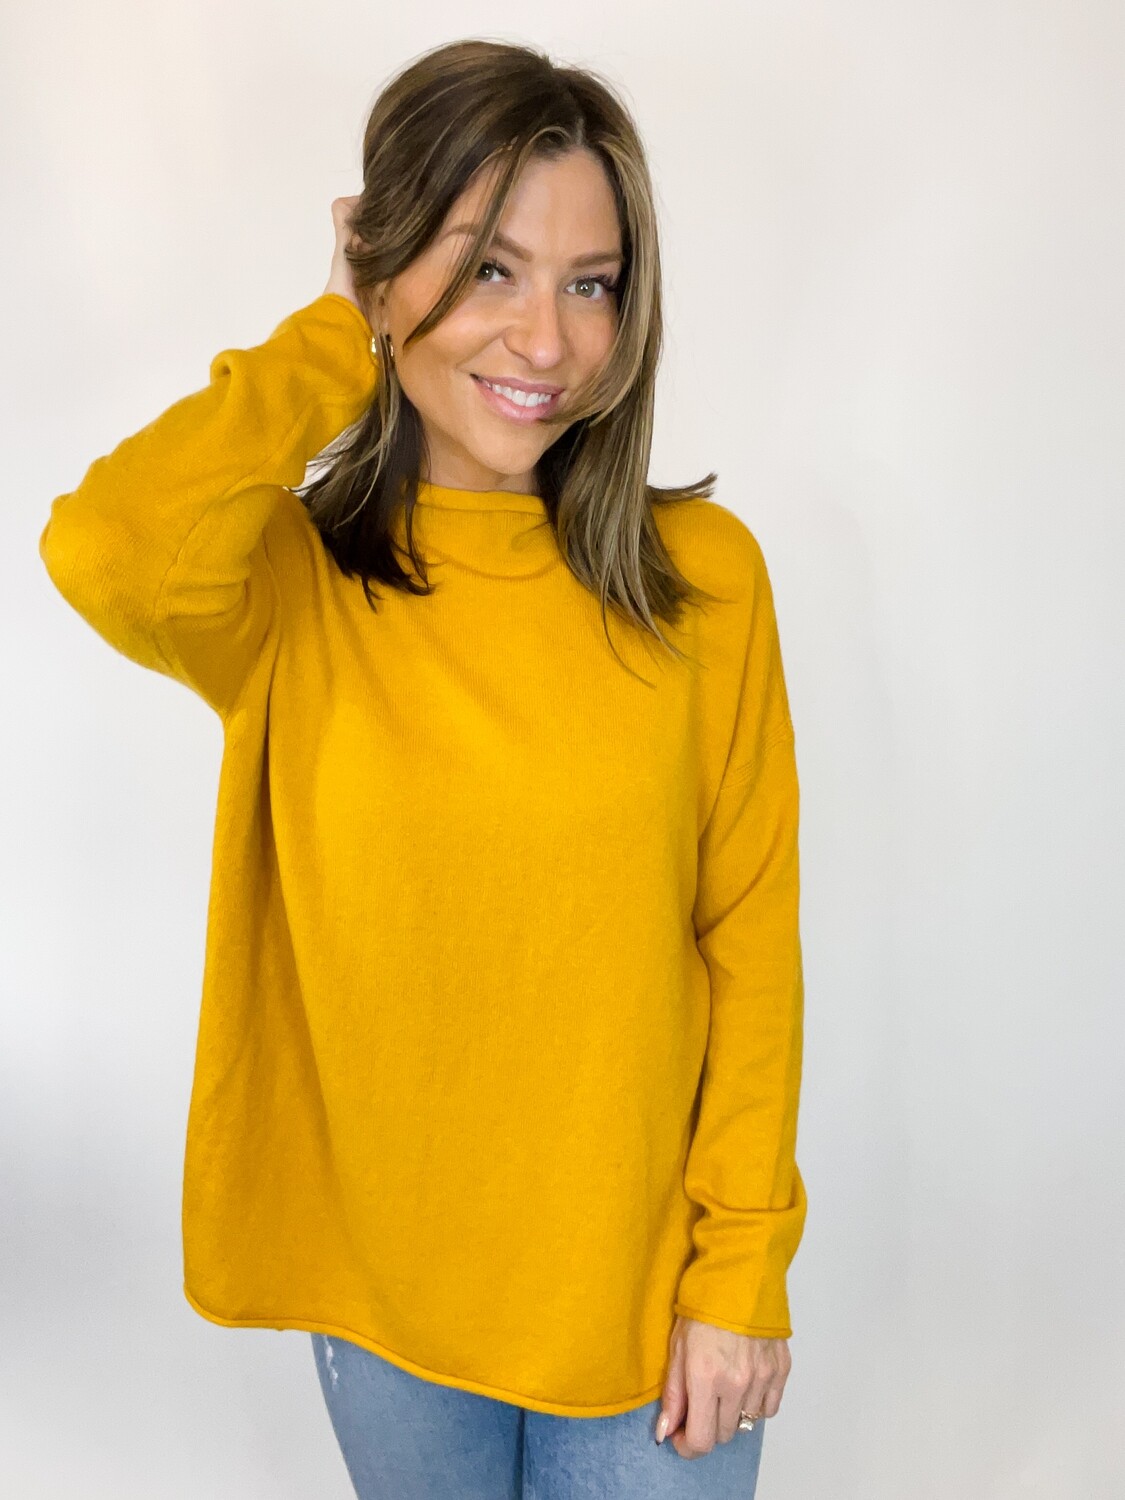 French Connection Calluna Yellow High Neck Sweater - XS